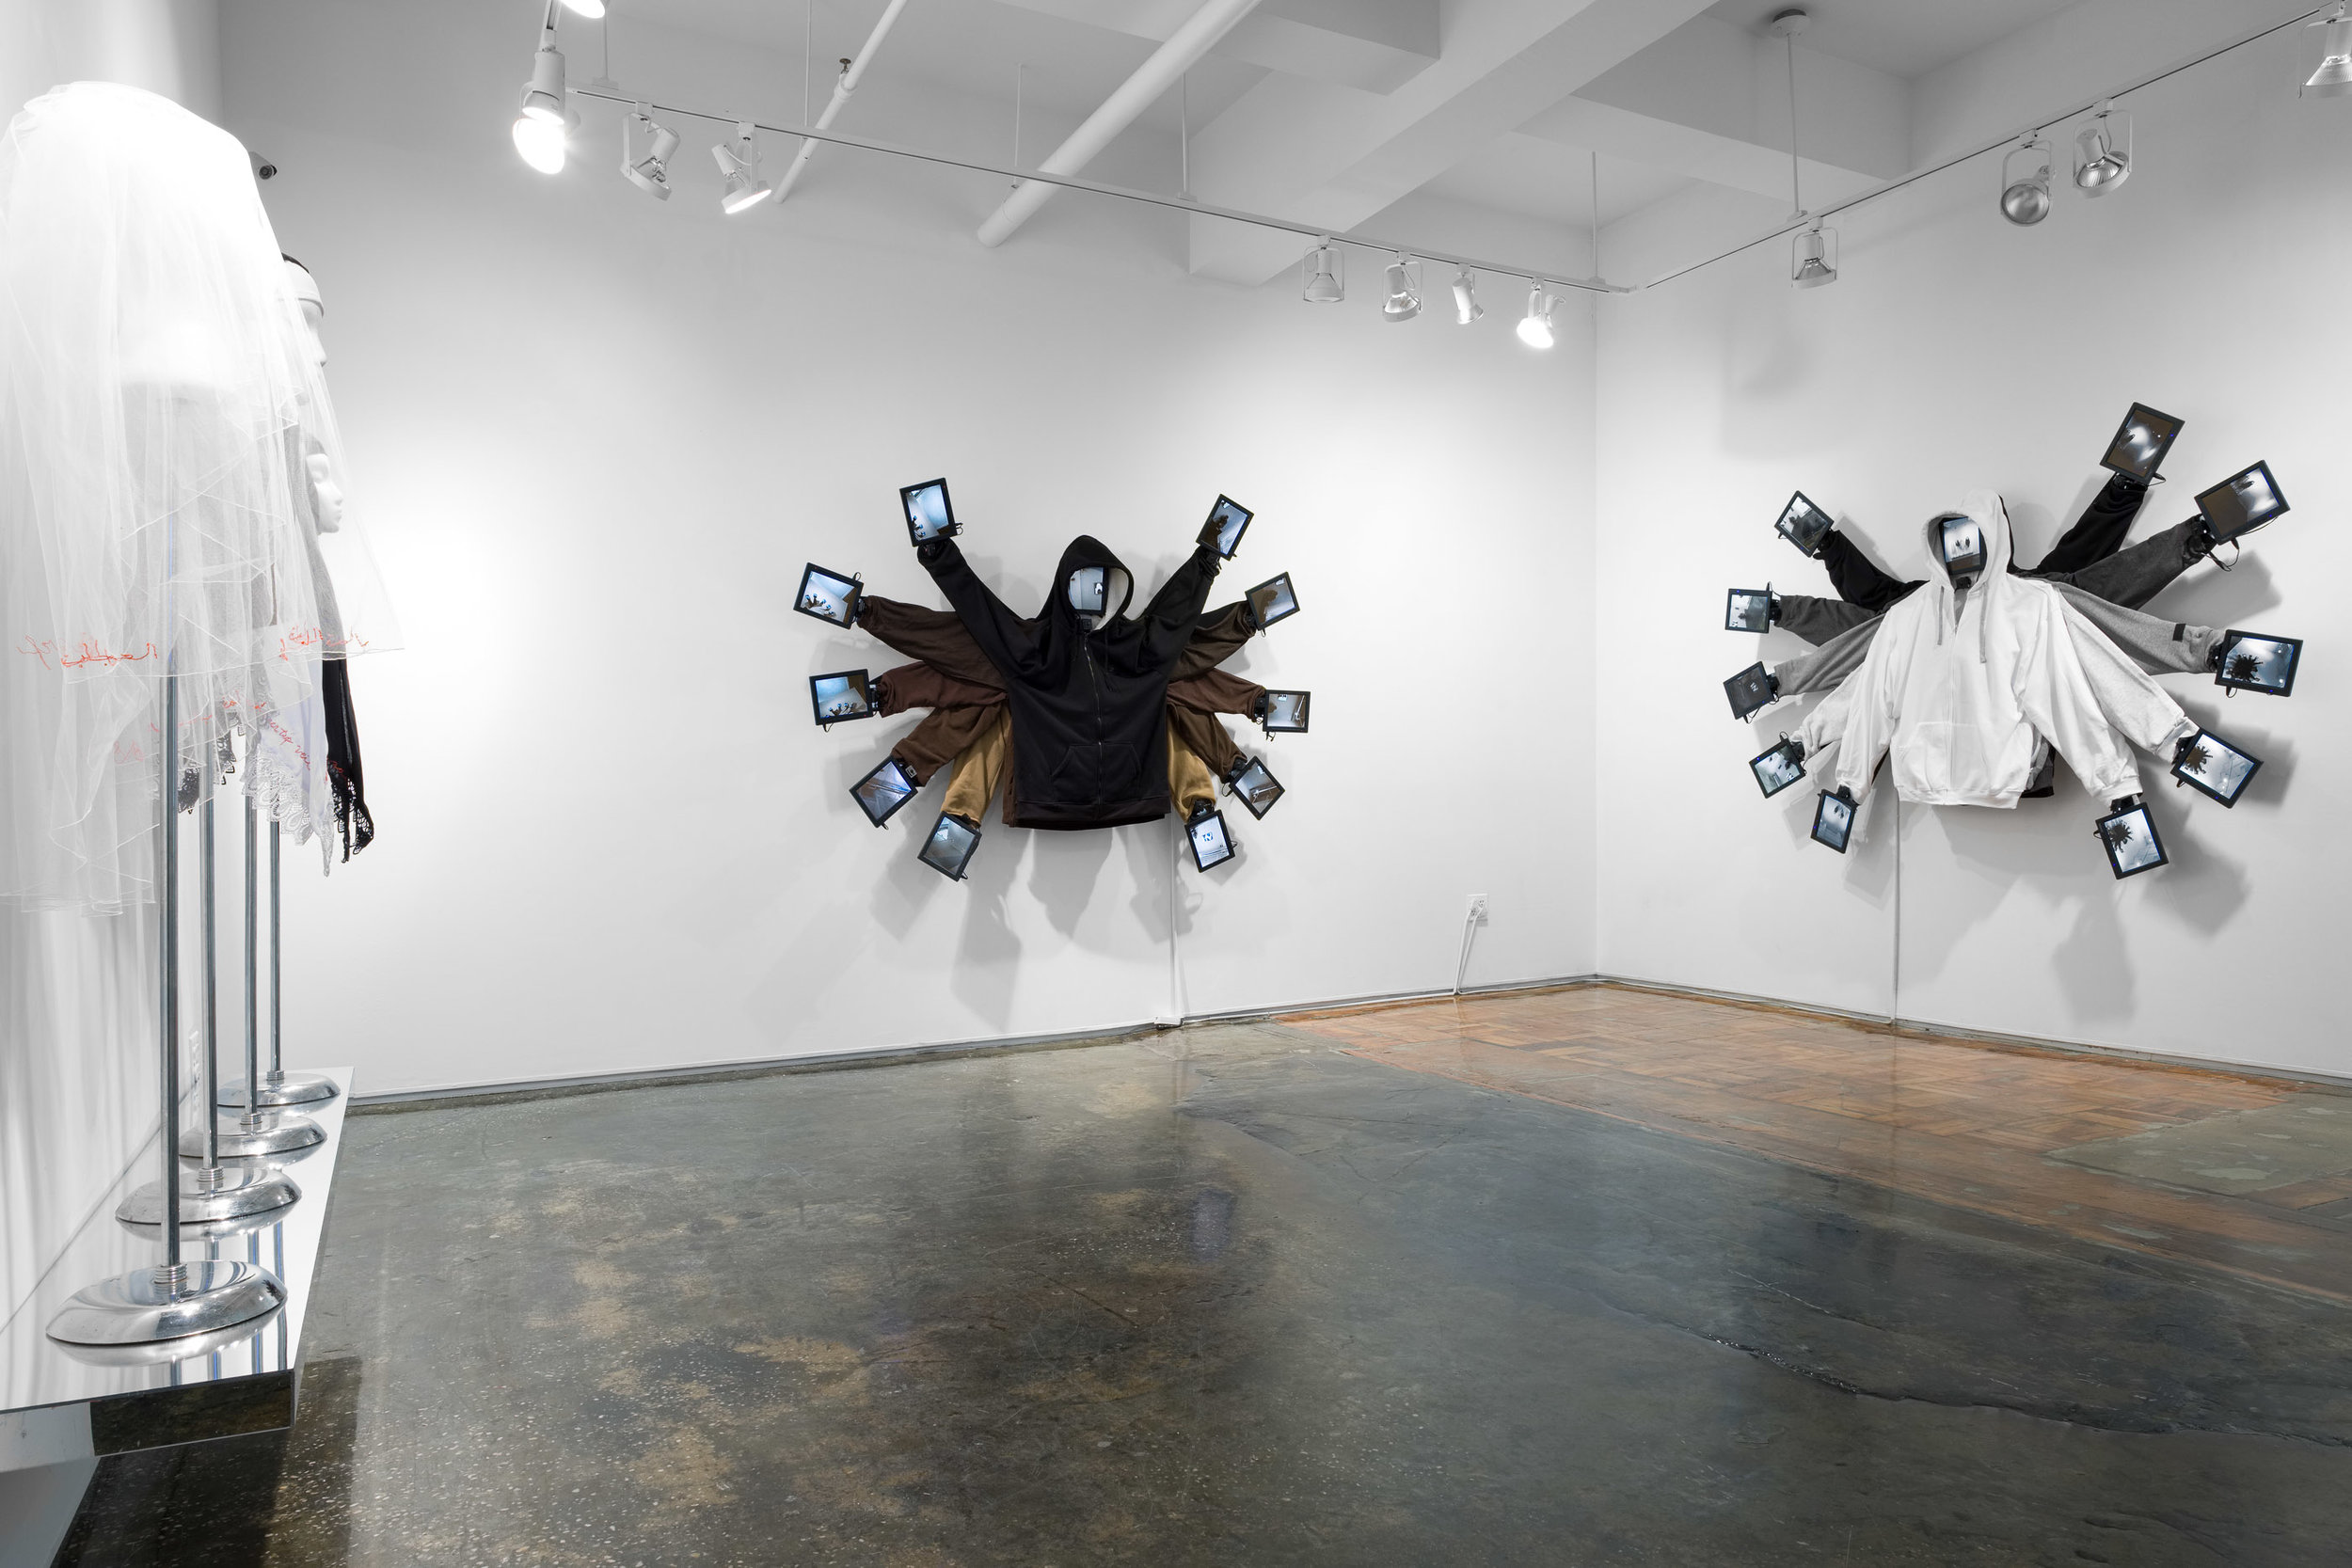  Installation View Photography by Sebastian Bach 